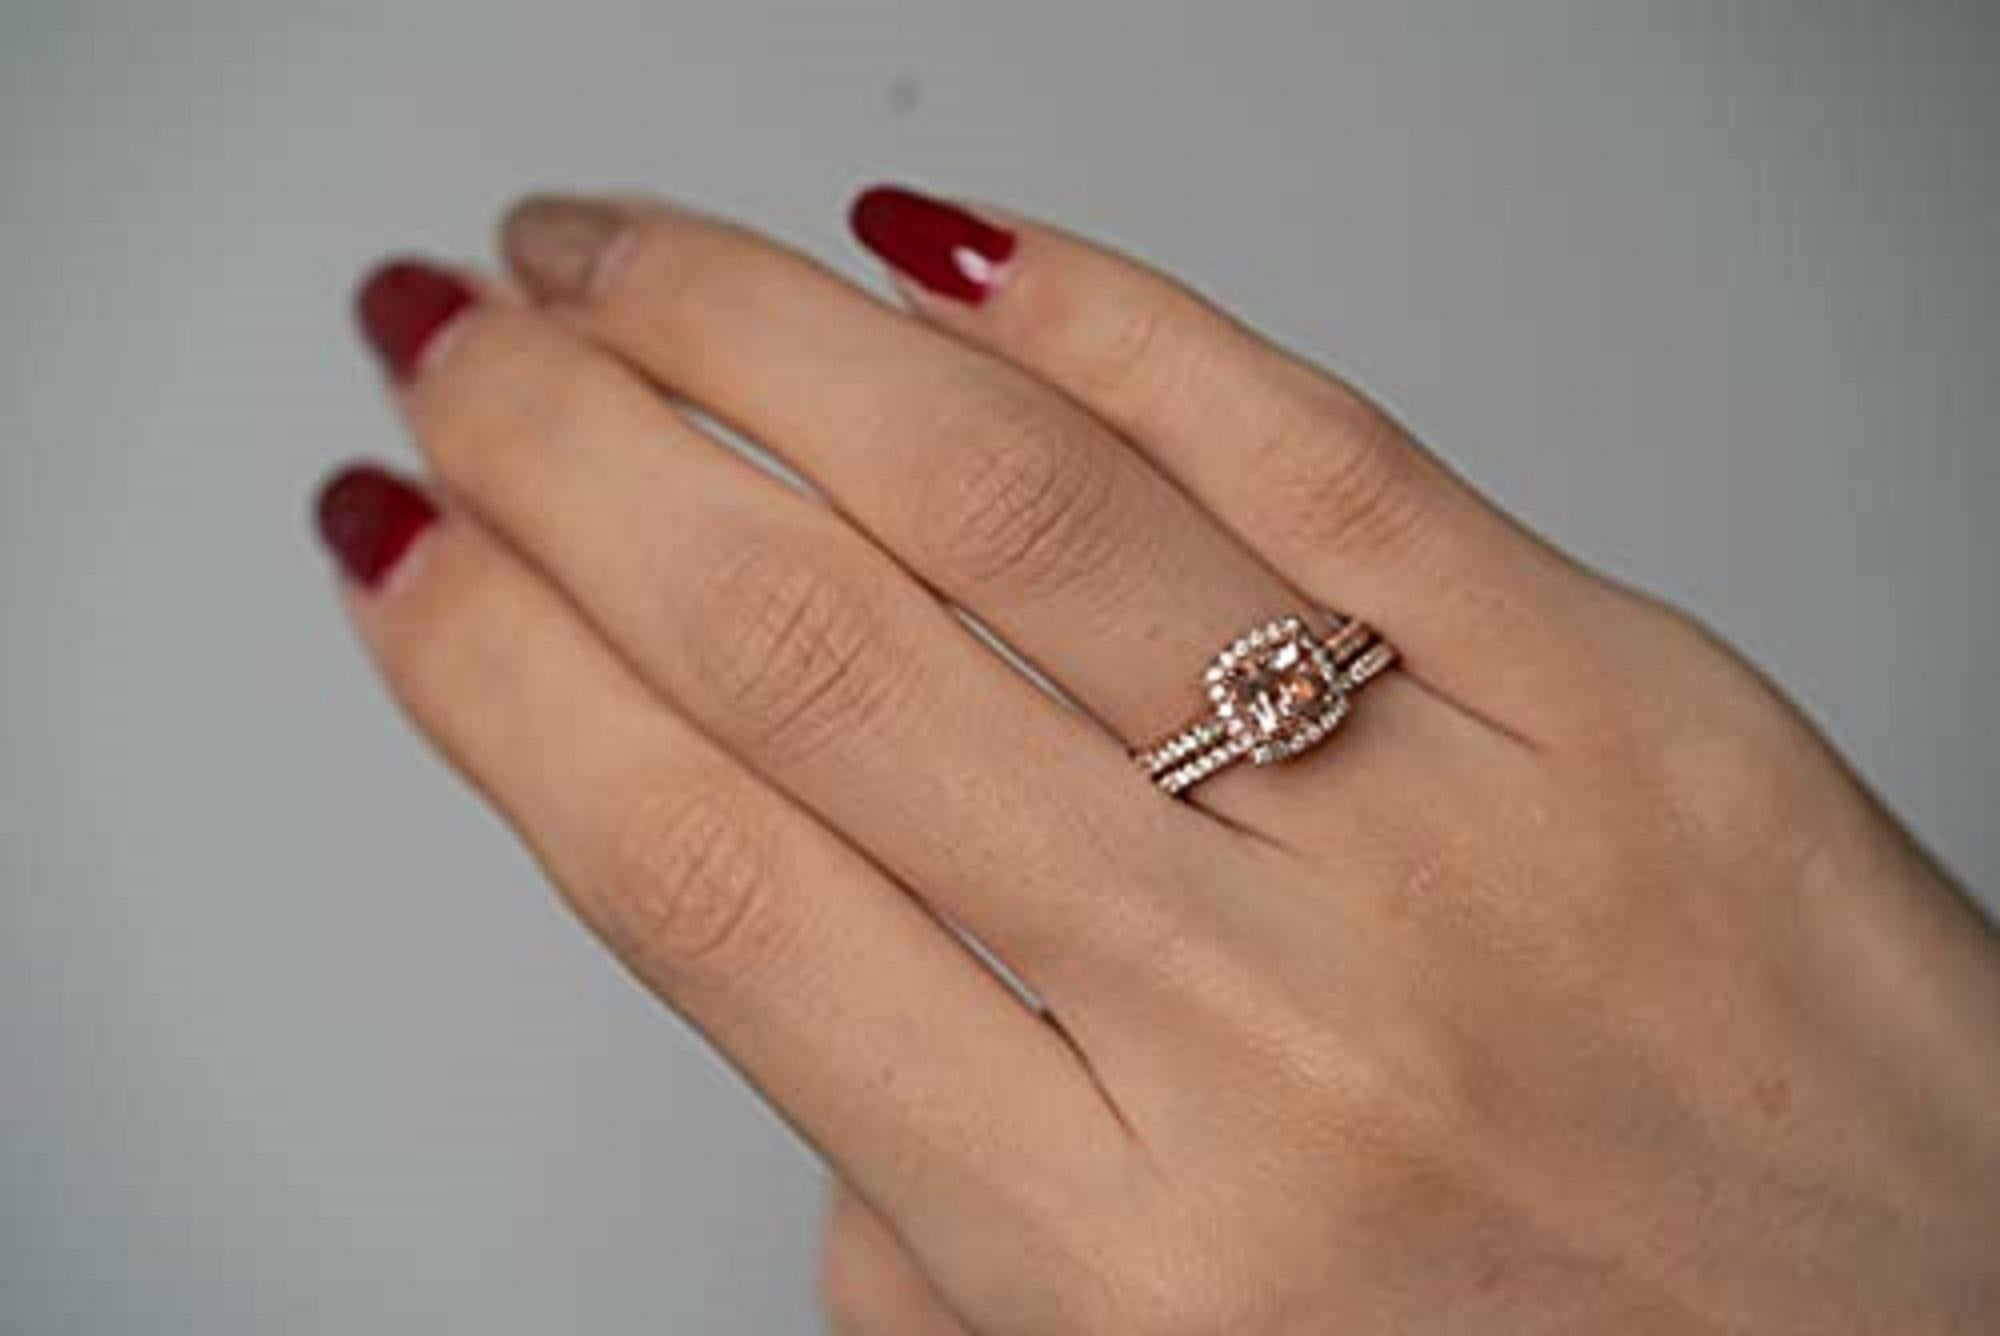 Stunning, timeless and classy eternity engagement ring. Decorate yourself in luxury with this Gin & Grace ring. The 14k Rose Gold jewelry boasts 6MM Cushion-Cut Prong Setting Genuine Morganite (1pcs) 0.89 Carat, and Round-Cut Prong Setting Natural